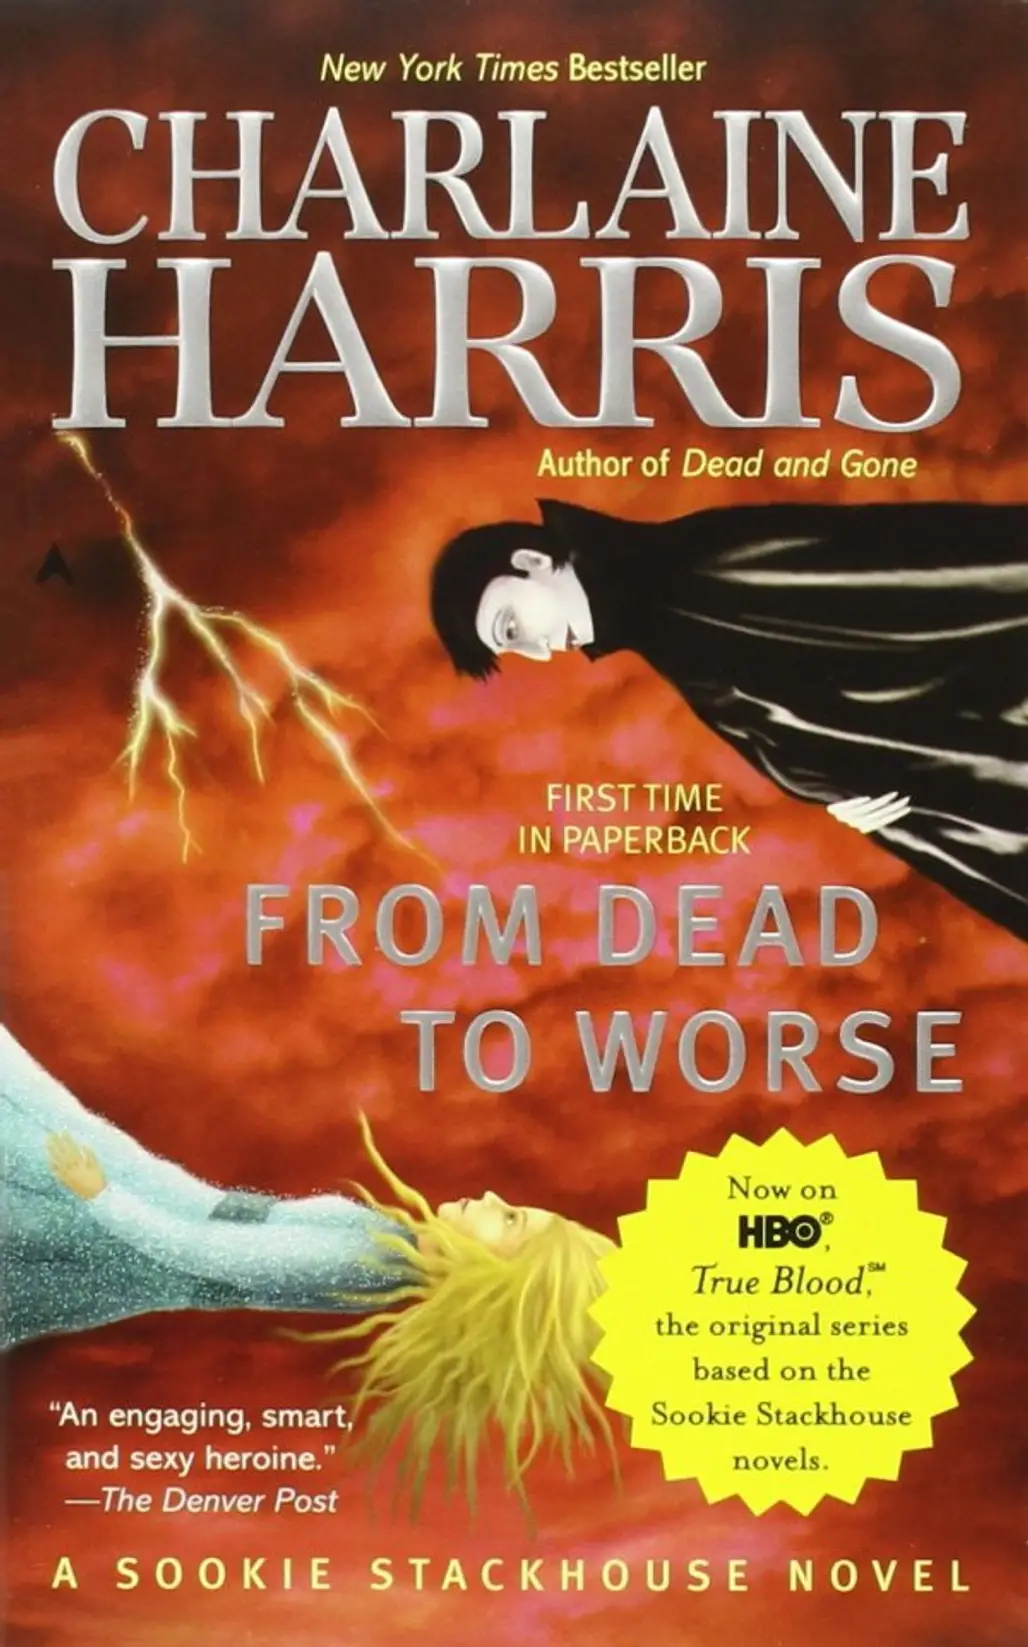 Sookie Stackhouse by Charlaine Harris